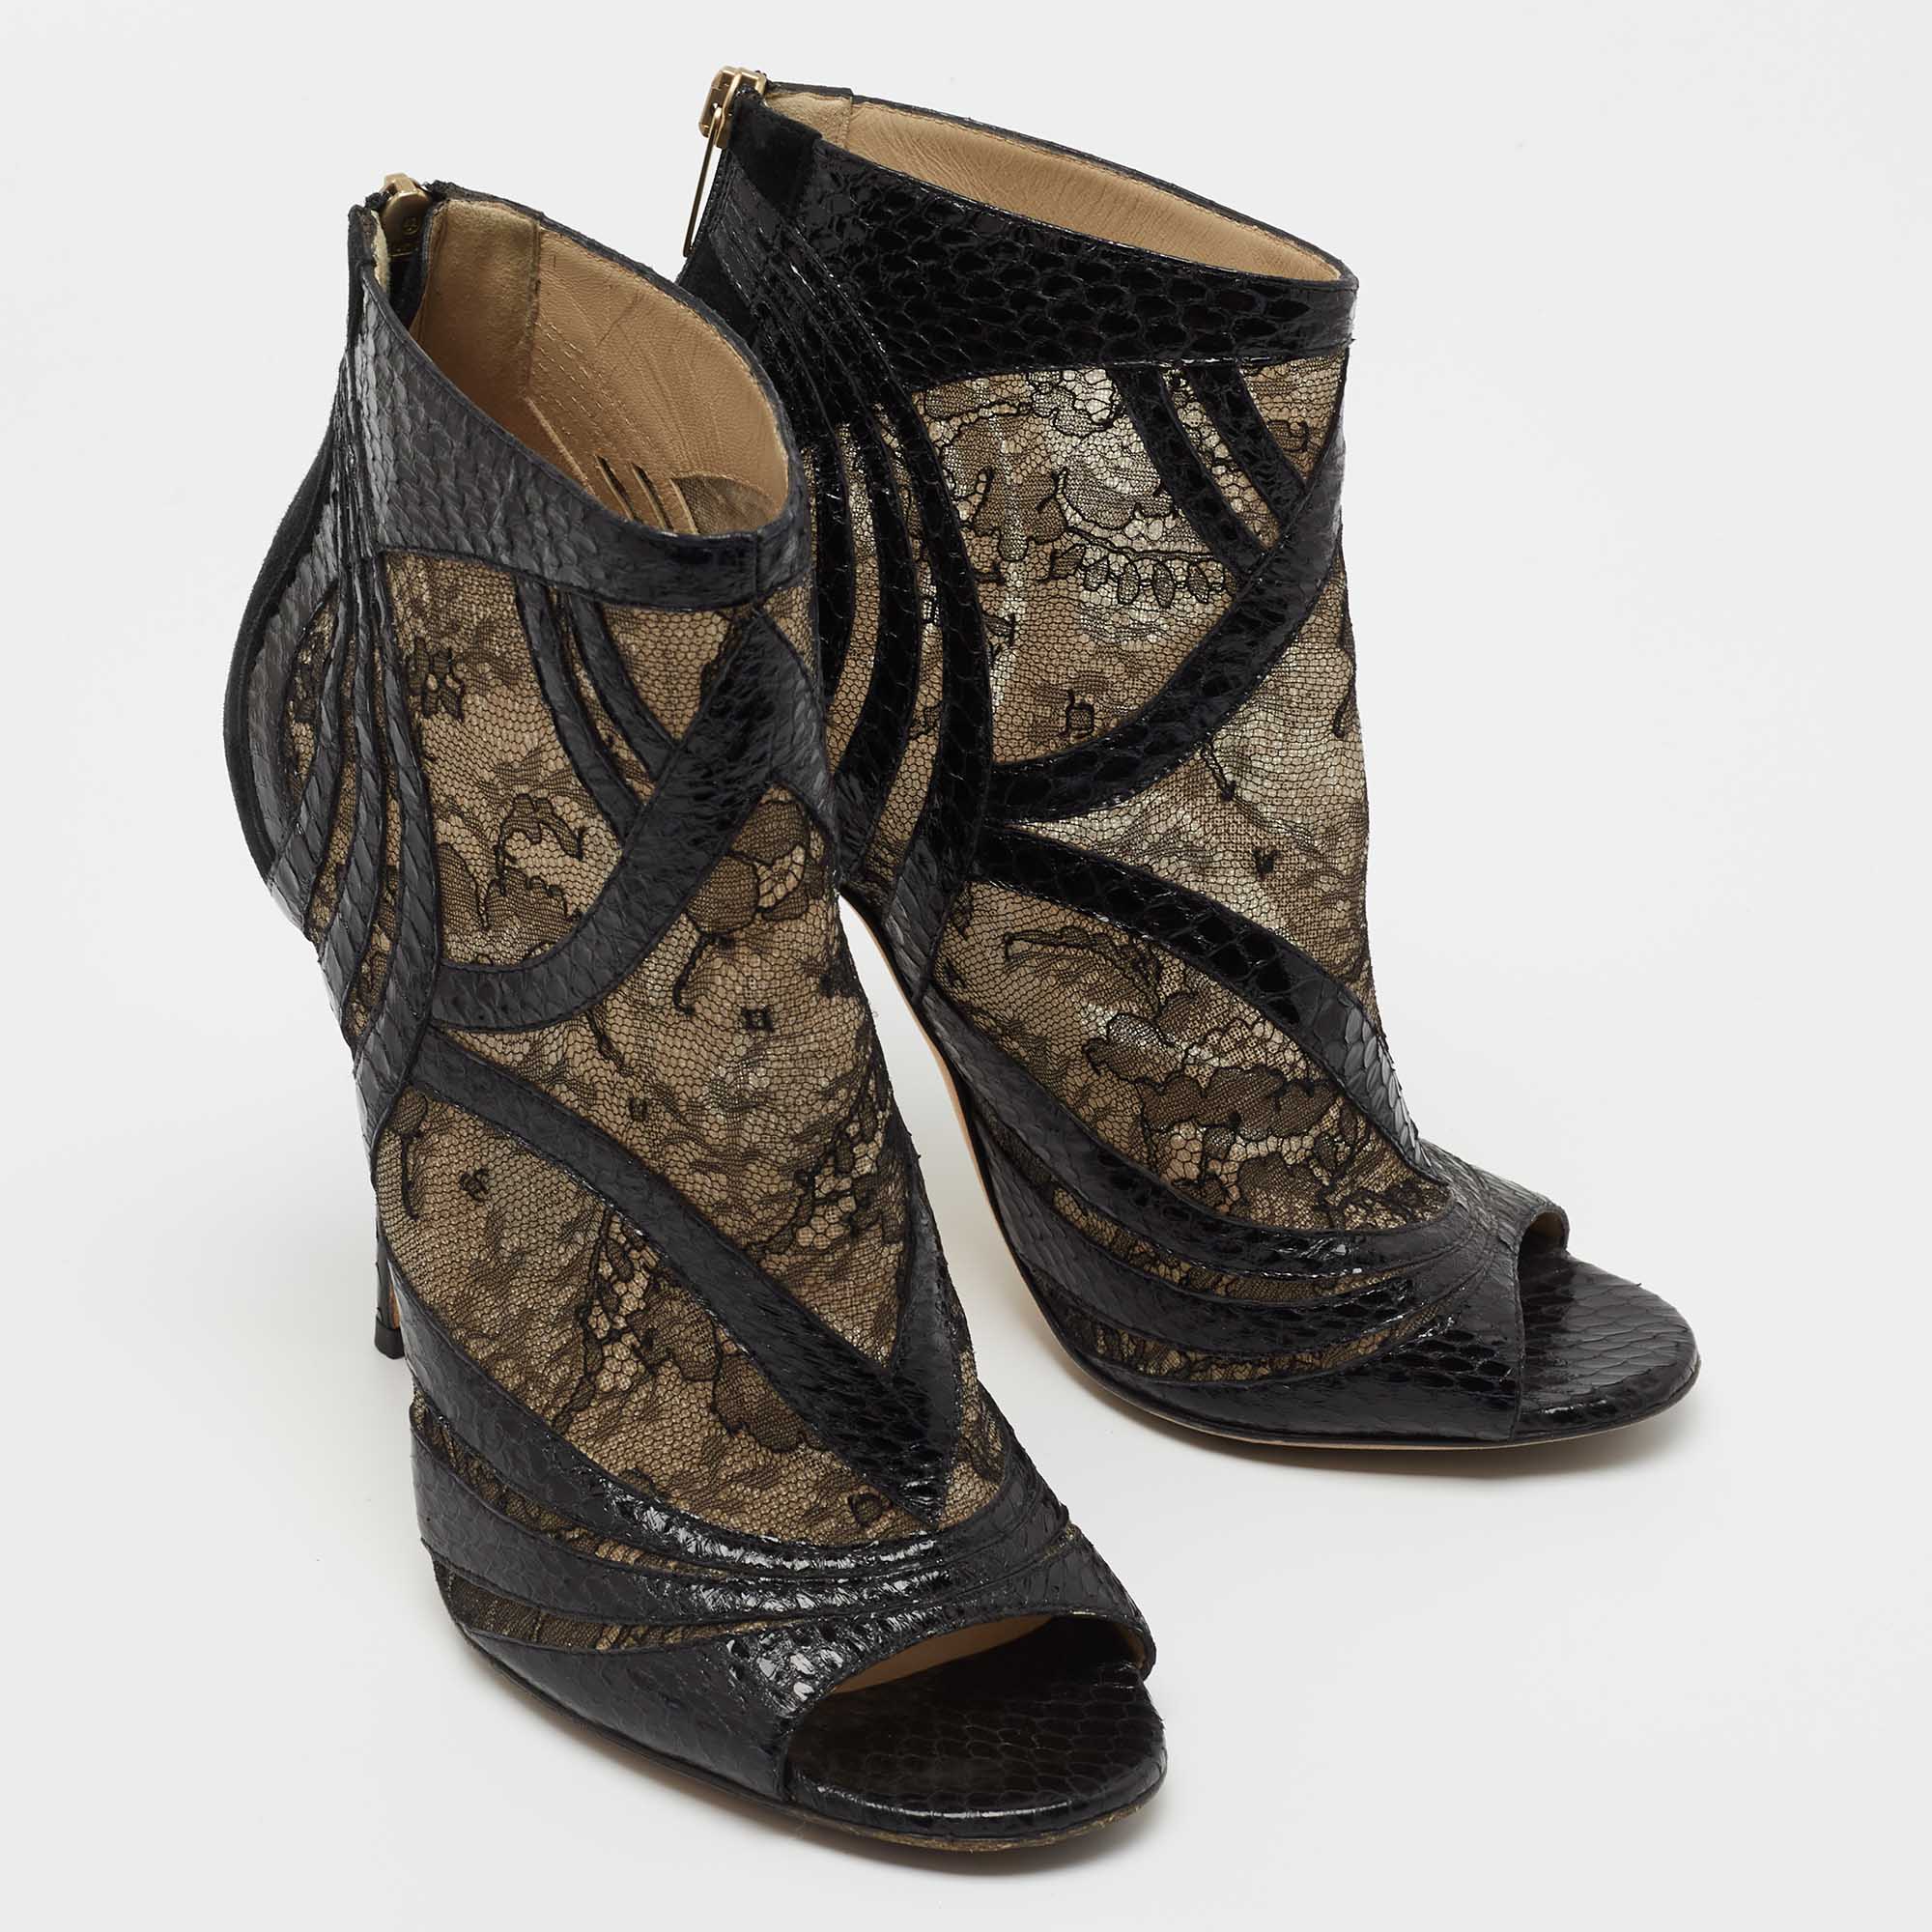 Jimmy Choo Black/Beige Snakeskin And Lace Ankle Boots Size 40